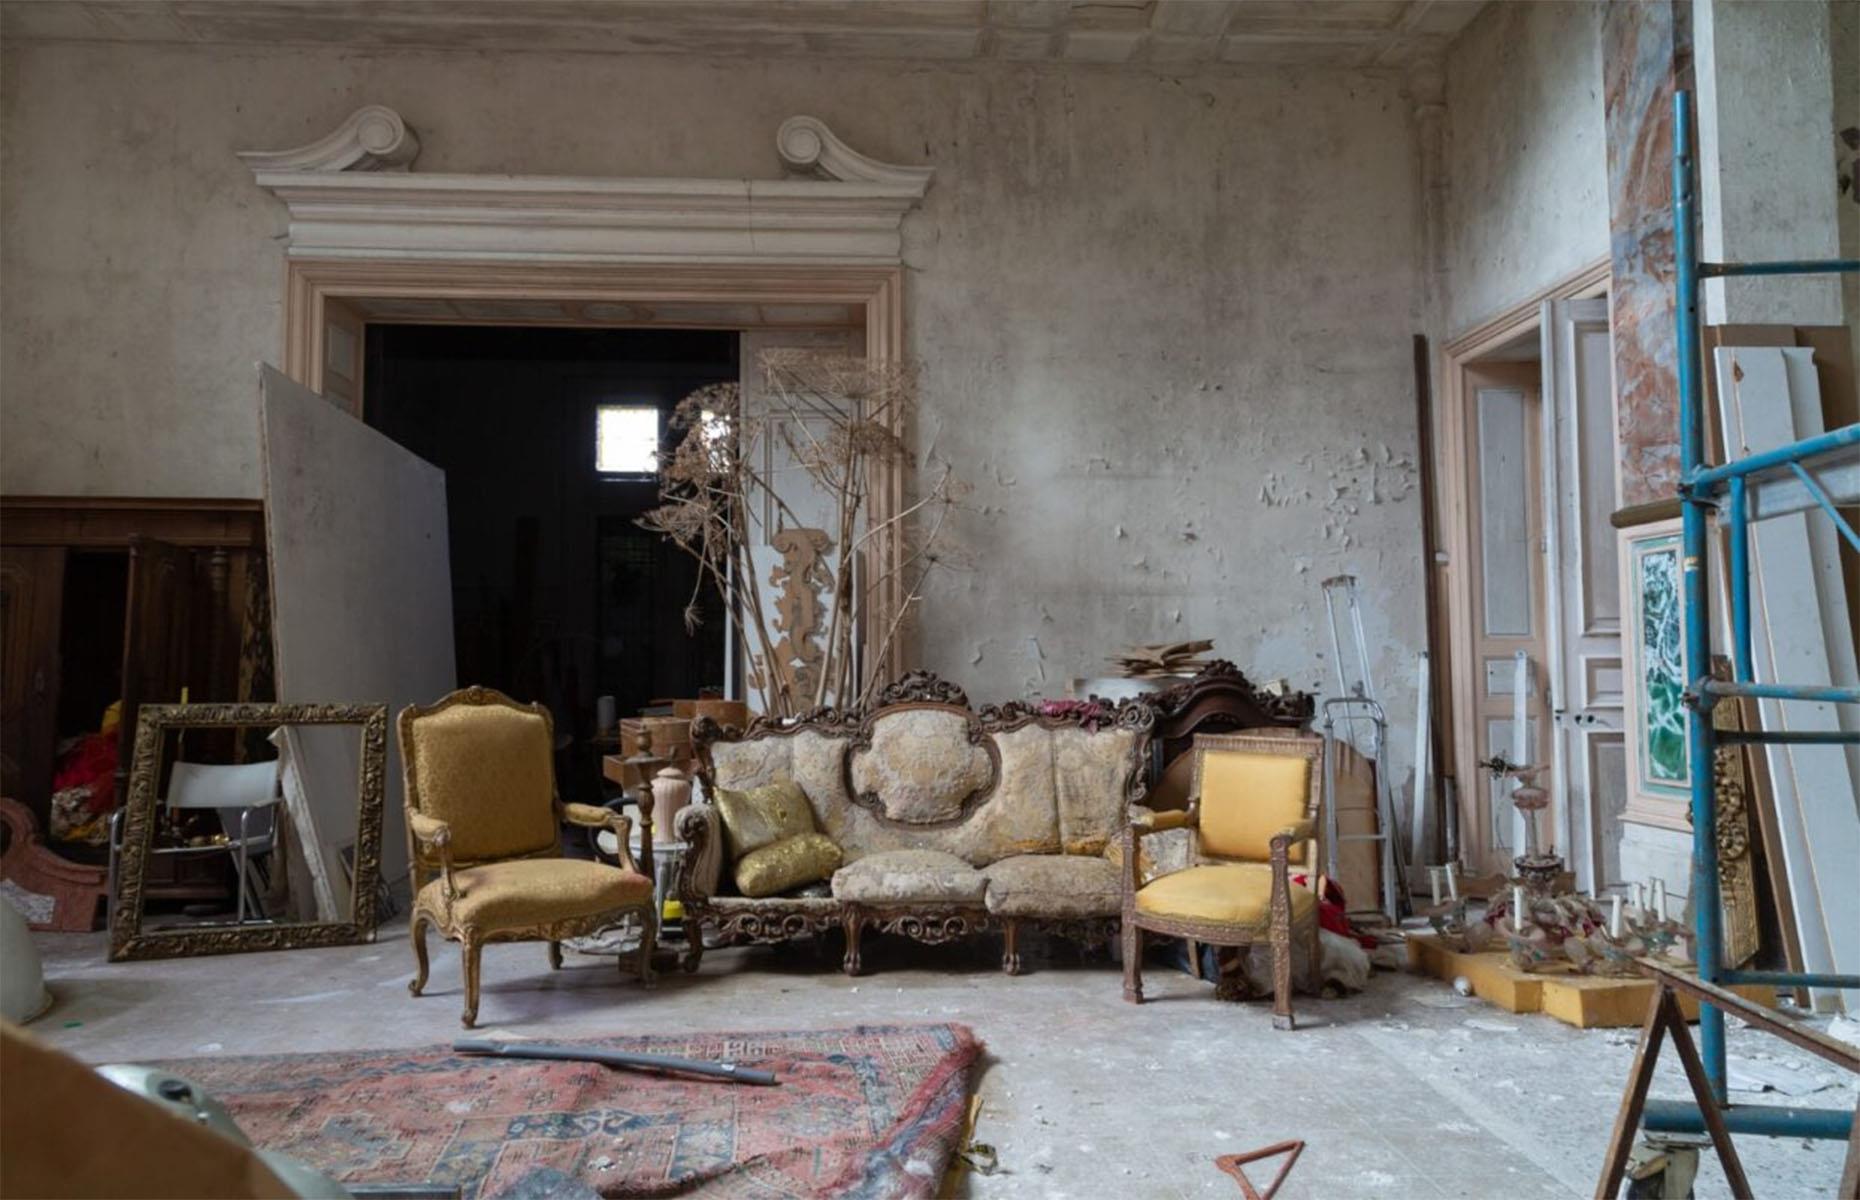 <p>This spacious room would likely once have been the heart of the home, with high ceilings and plenty of elegant seating.</p>  <p>While the plaster is peeling from the walls, there is still a sort of stripped-back elegance to this space, which throws the grandeur of the furniture and highly decorative door frames into even sharper relief.</p>